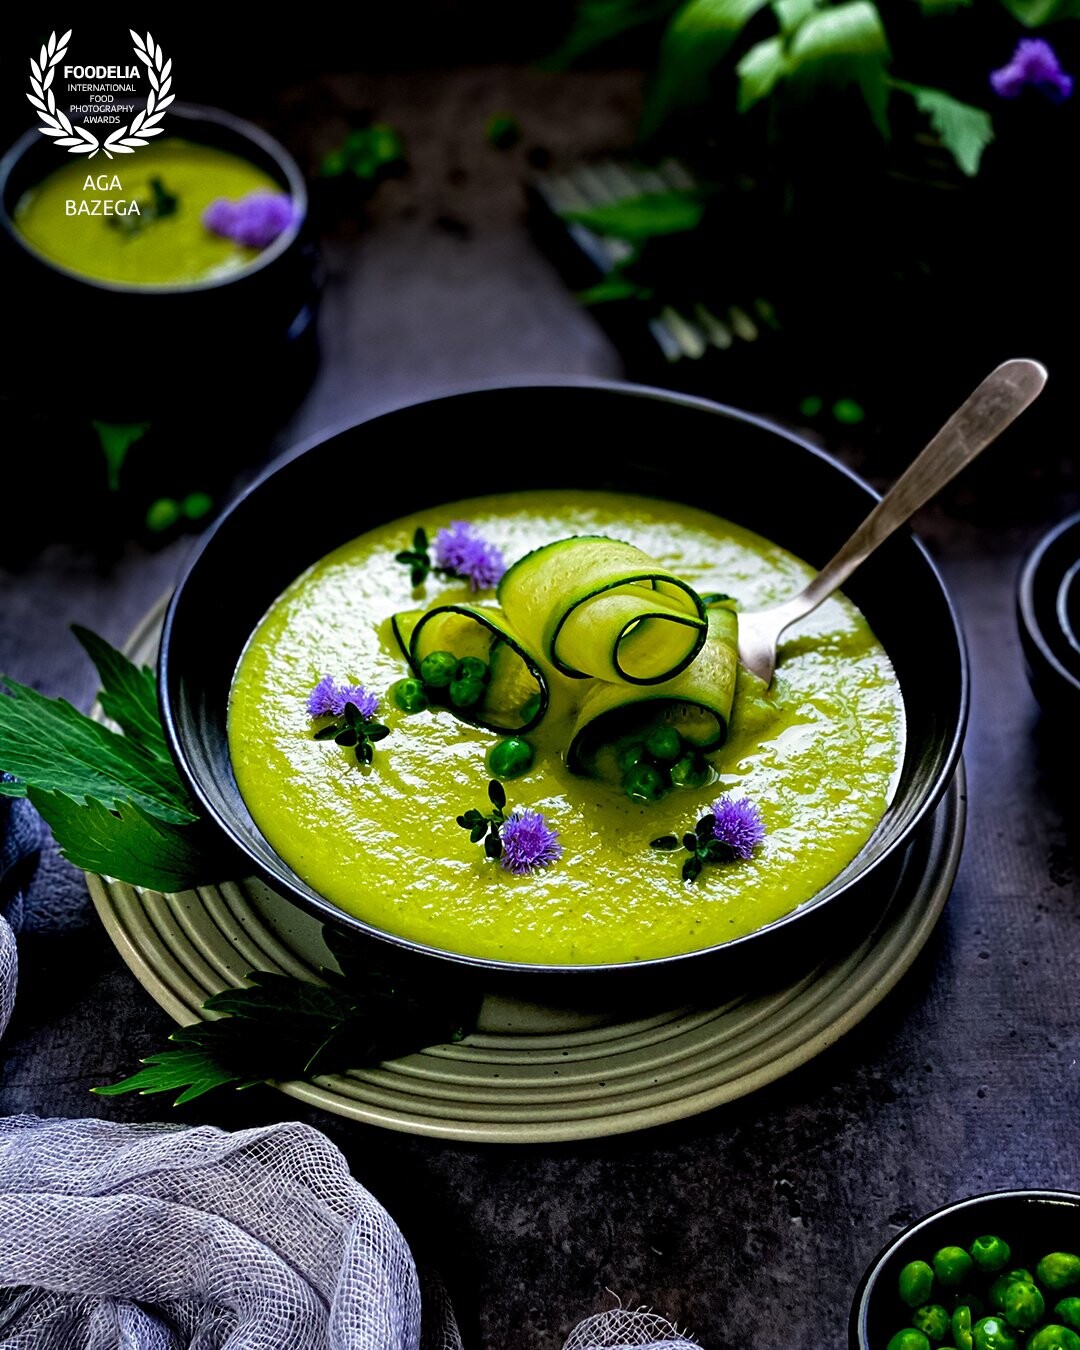 Green pea creamy soup served with edible flowers and thyme. Image created for photography challenge. Captured with a natural light.